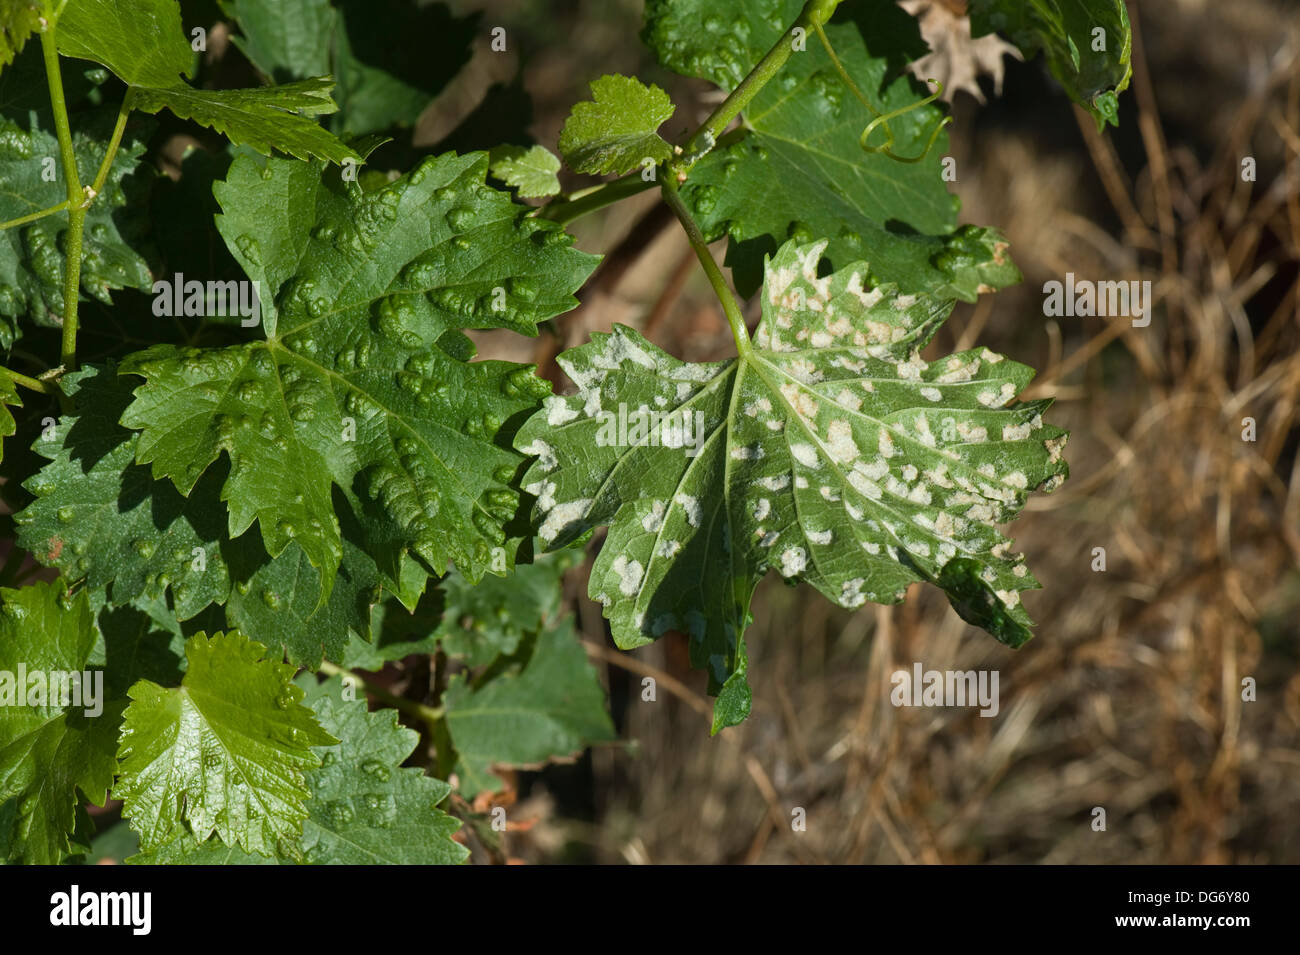 Grapevine blister mite, Eriophyes vitis, white damage blisters on the lower surface of vine leaves in France Stock Photo